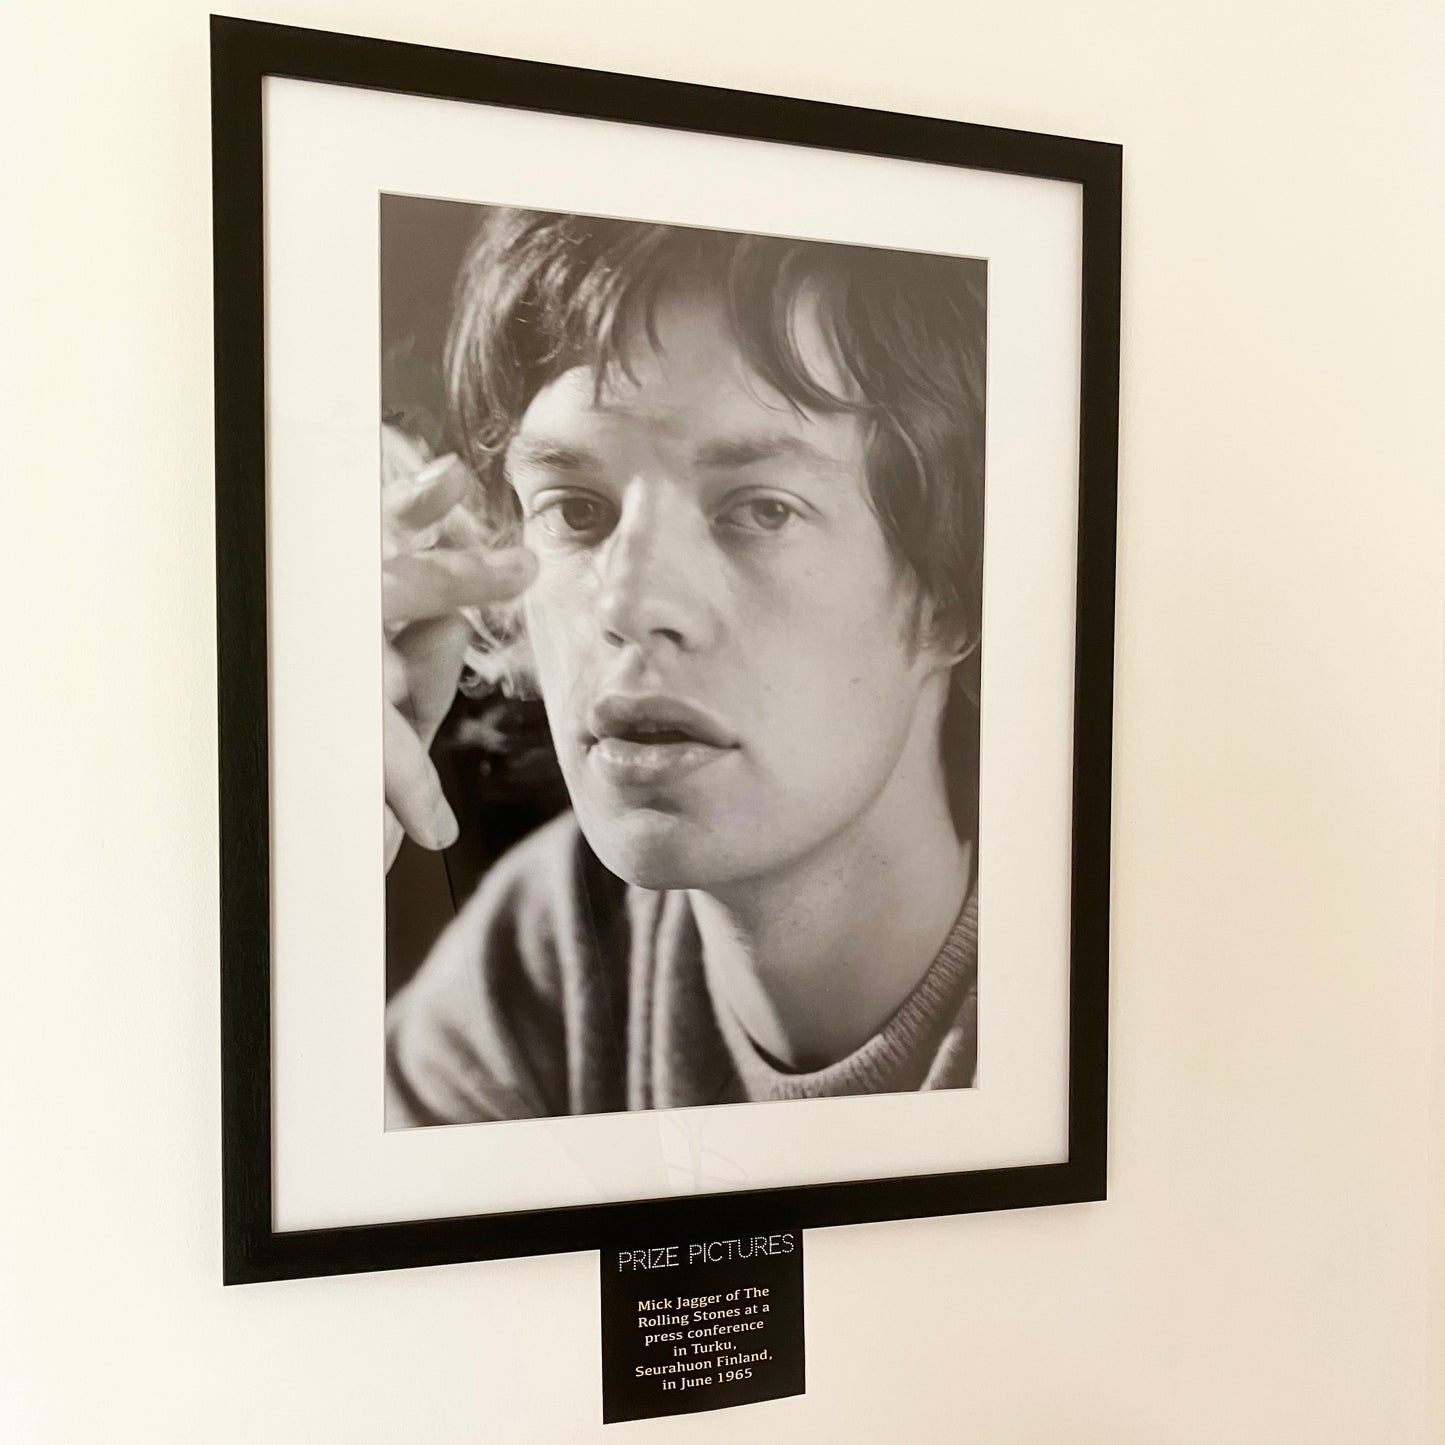 Mick Jagger Framed Photo Print in Finland 1965